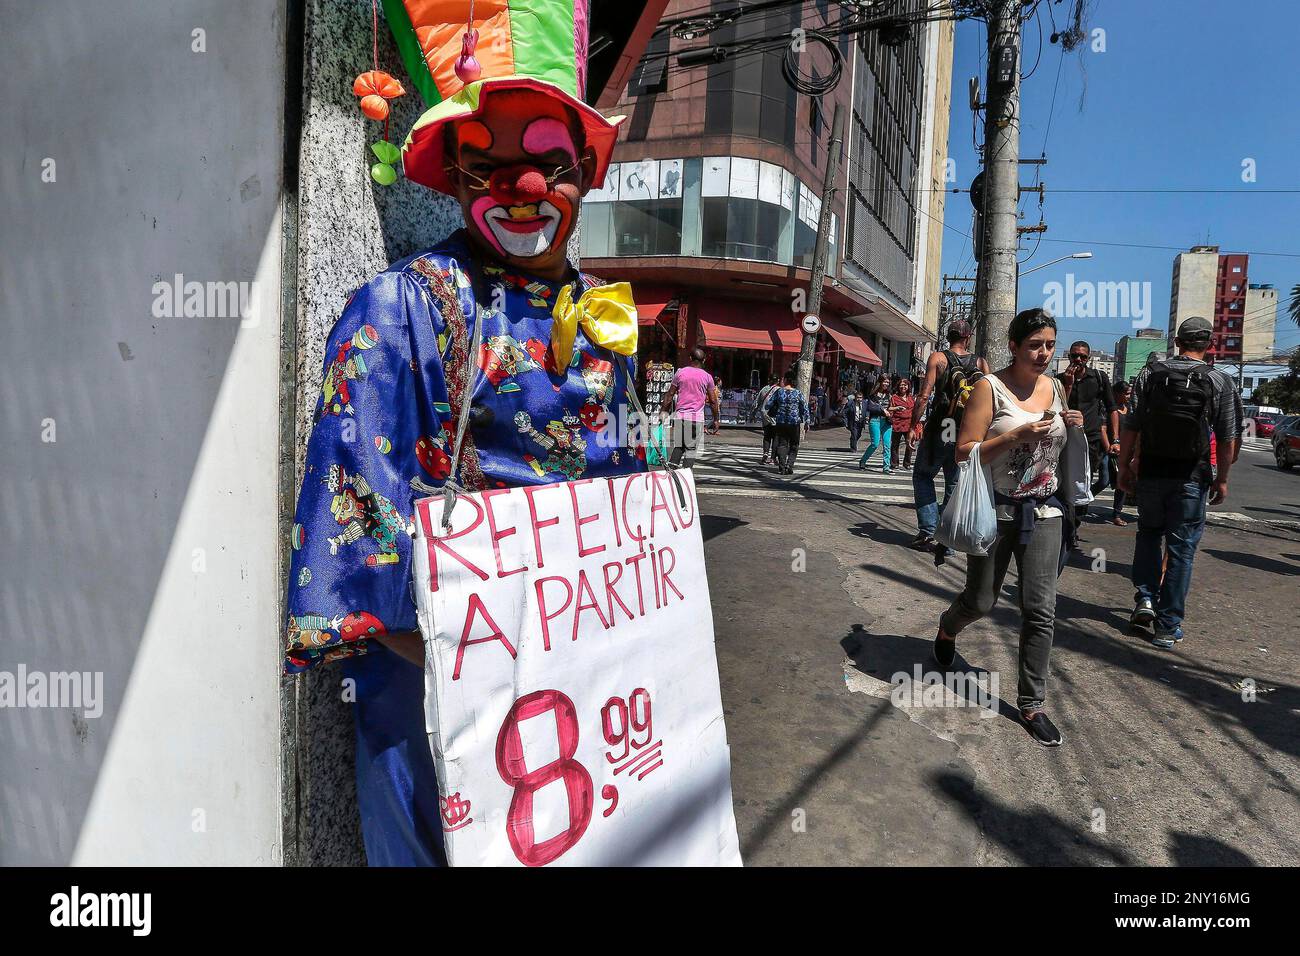 SP - São Paulo - 11/16/2017 - SPECIAL INFORMALITY - A man dressed as a  clown shows a poster with food values in the neighborhood of Bras, a region  known in the